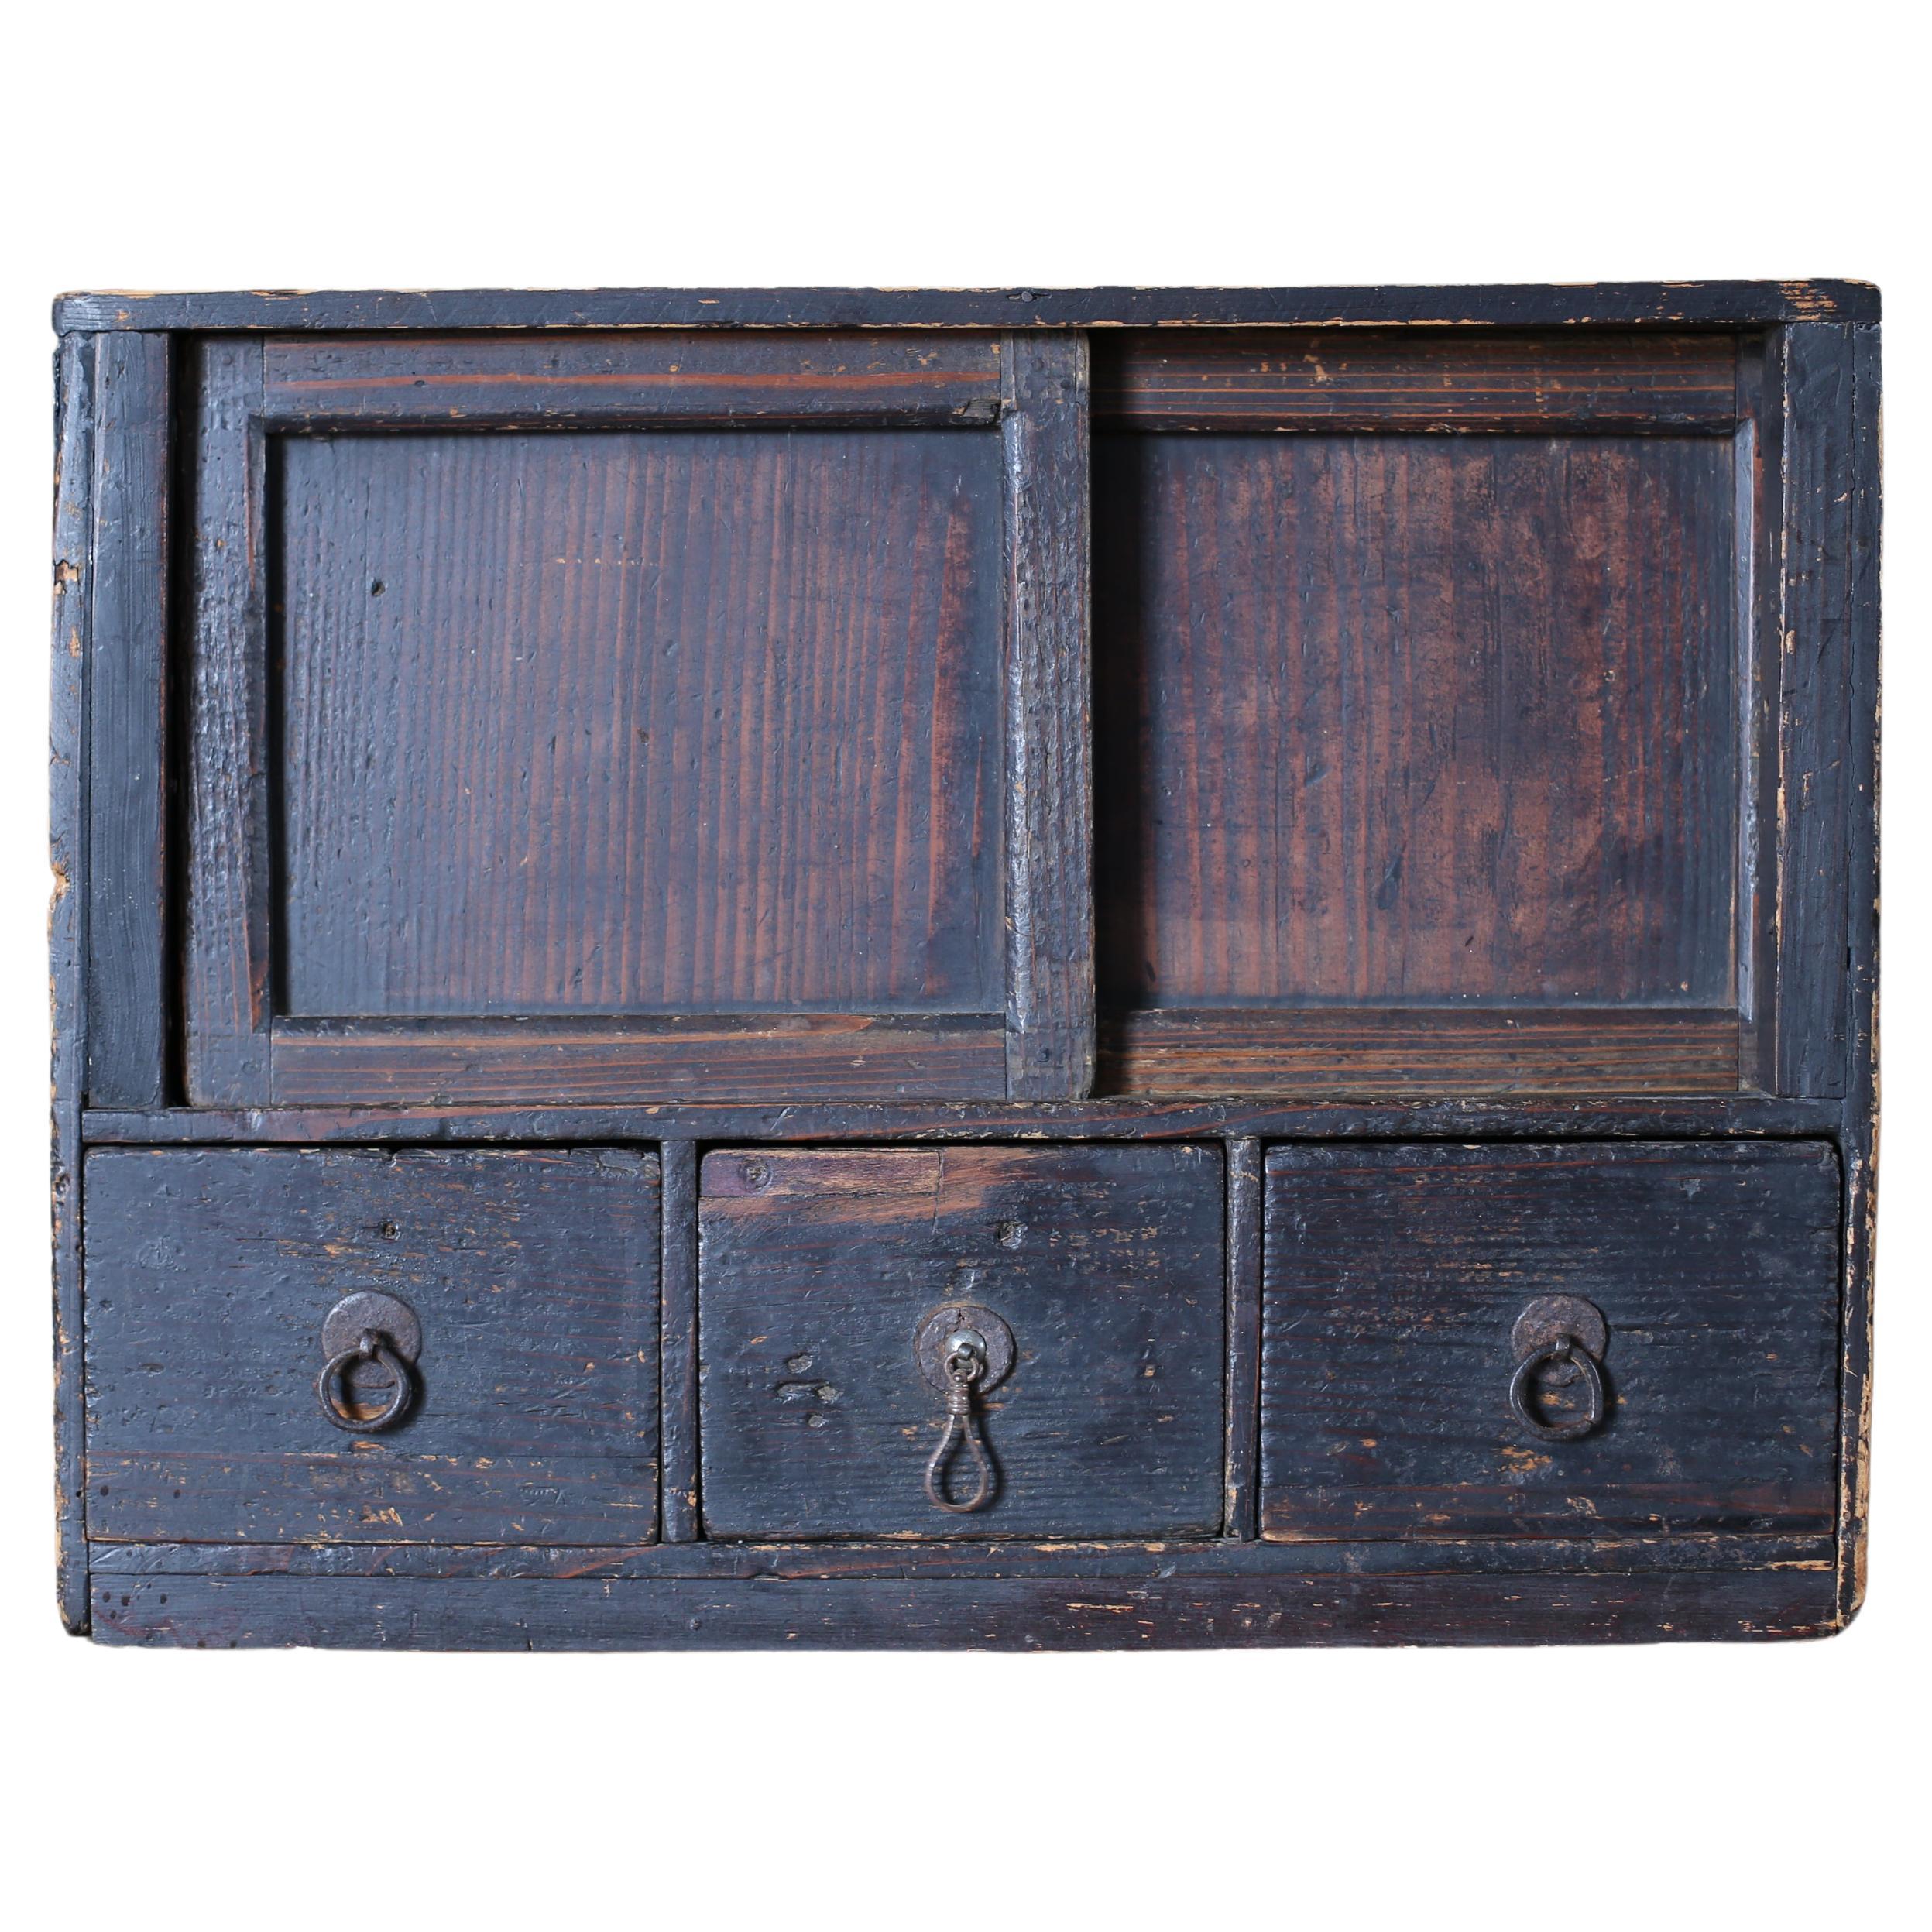 Japanese Antique Black Chests of Drawers, 1800s-1860s / with Sliding Door For Sale